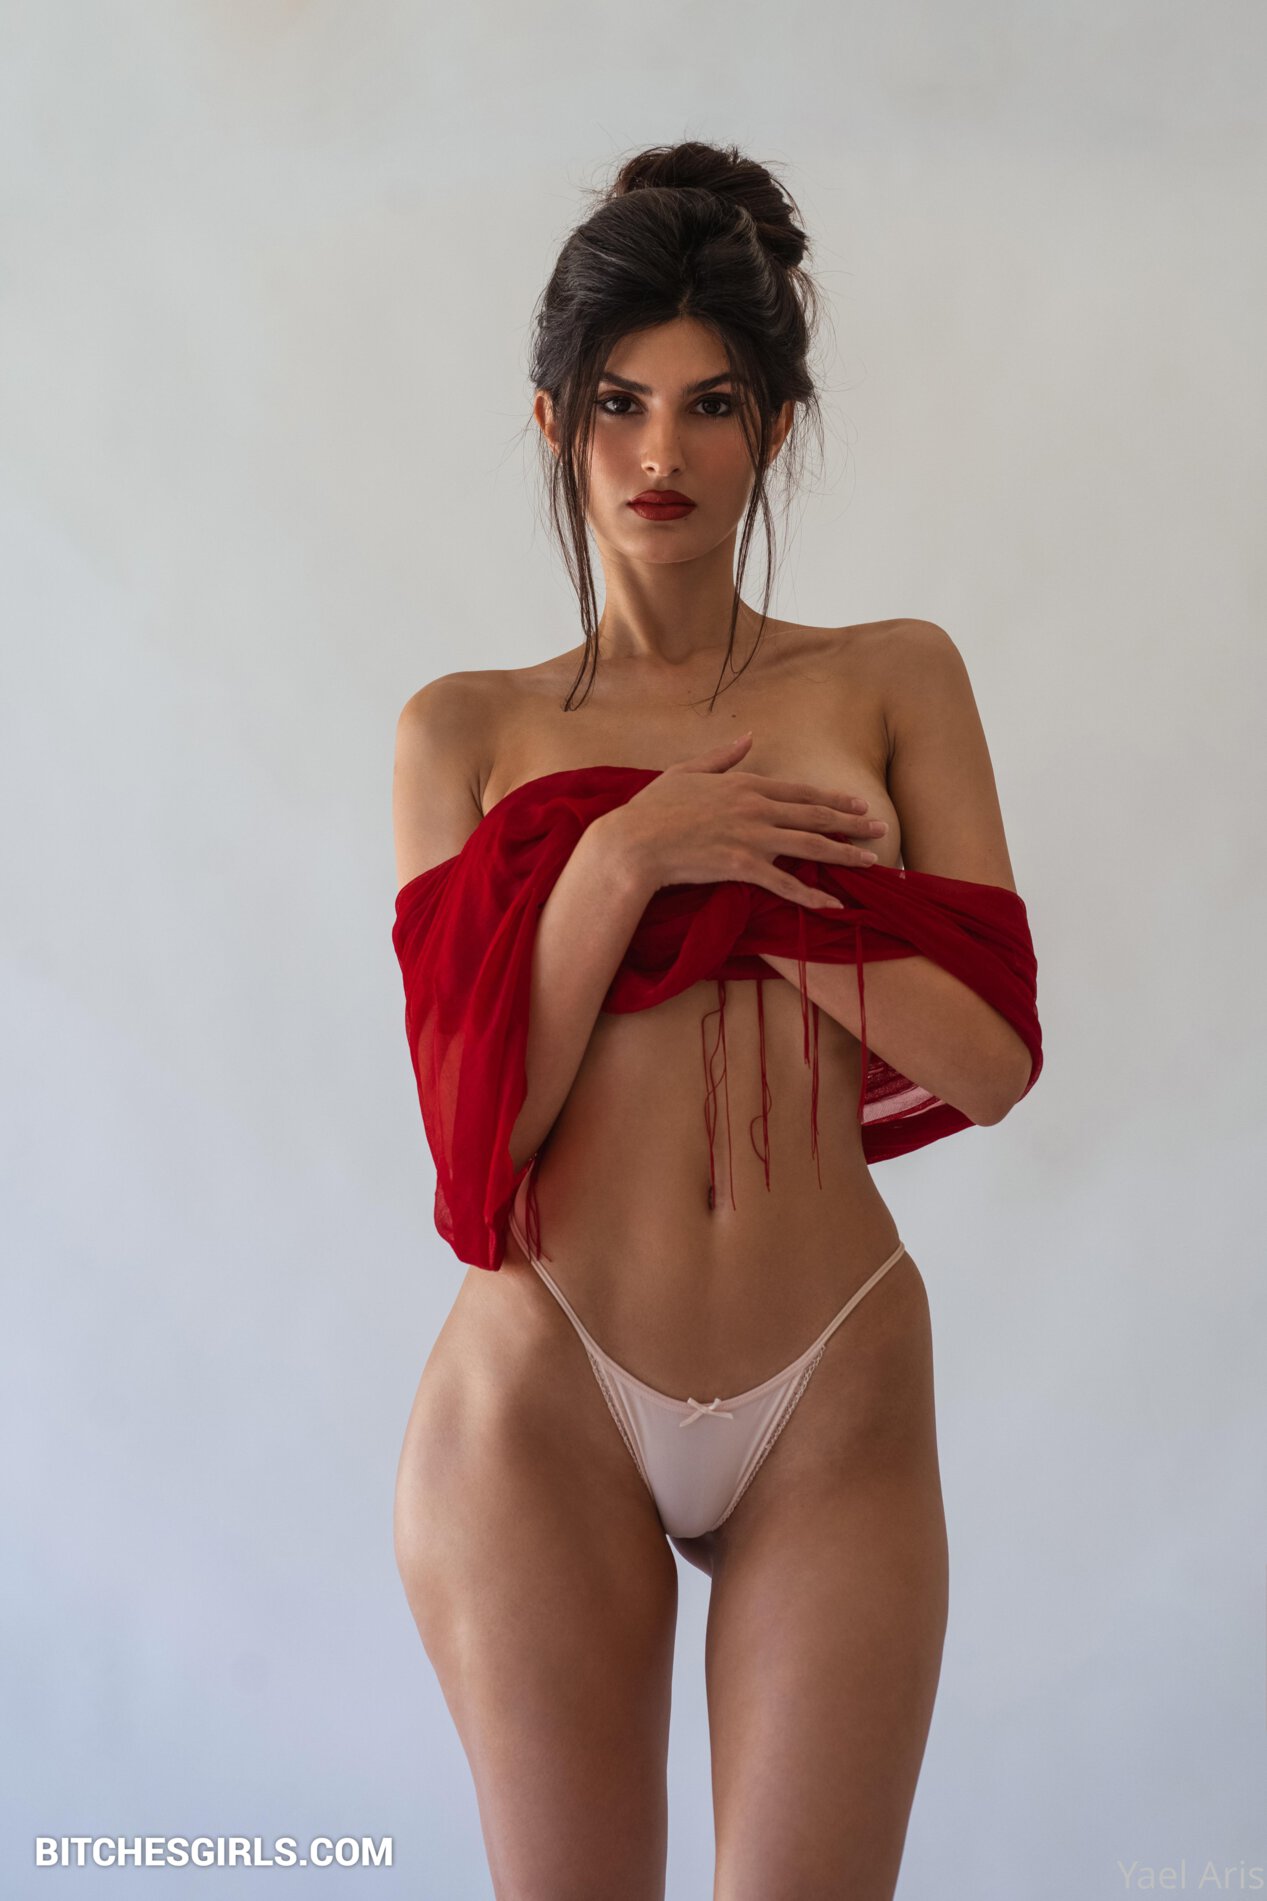 Yael Cohen Aris Topless Red Lingerie Tease Video Leaked